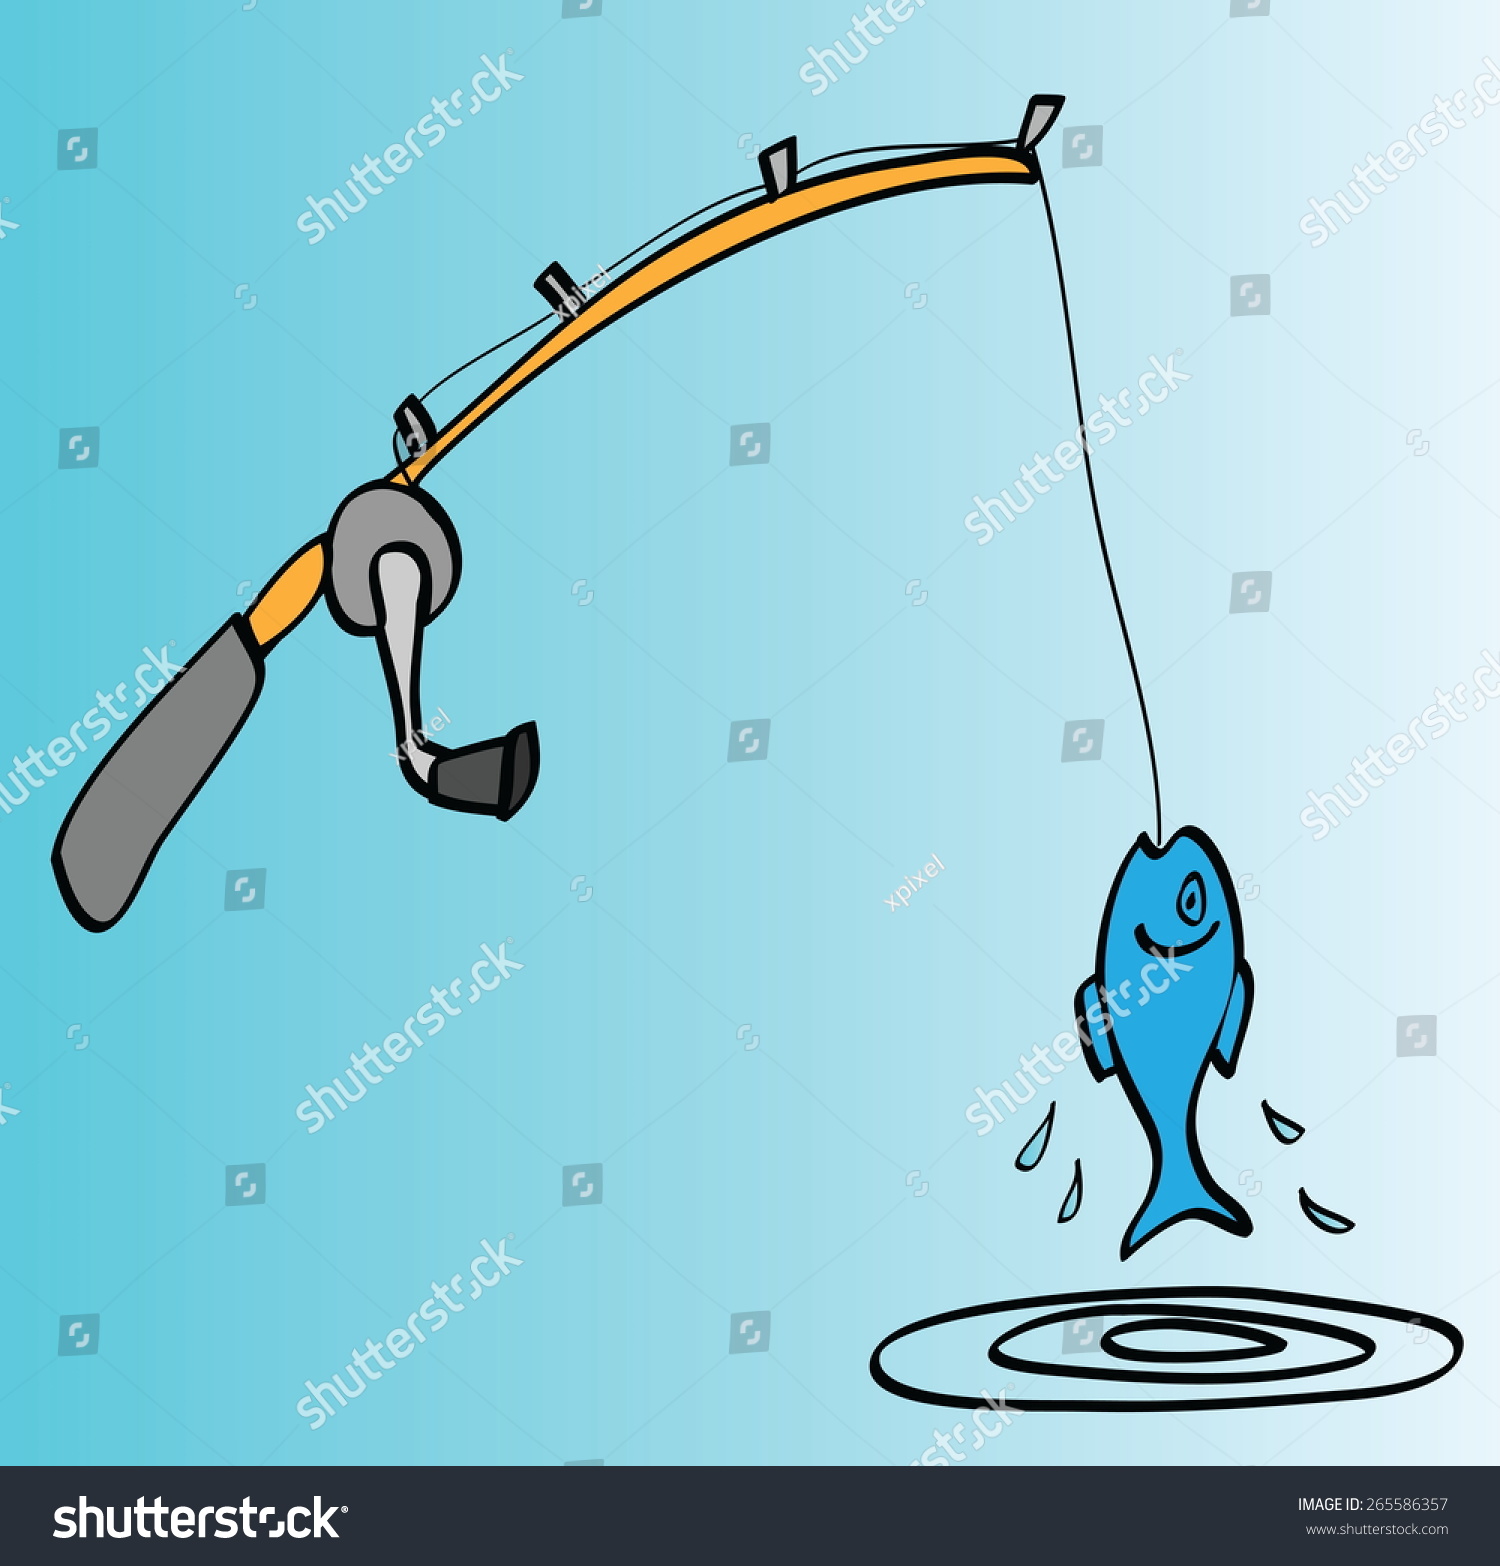 Image result for a hooked fish images